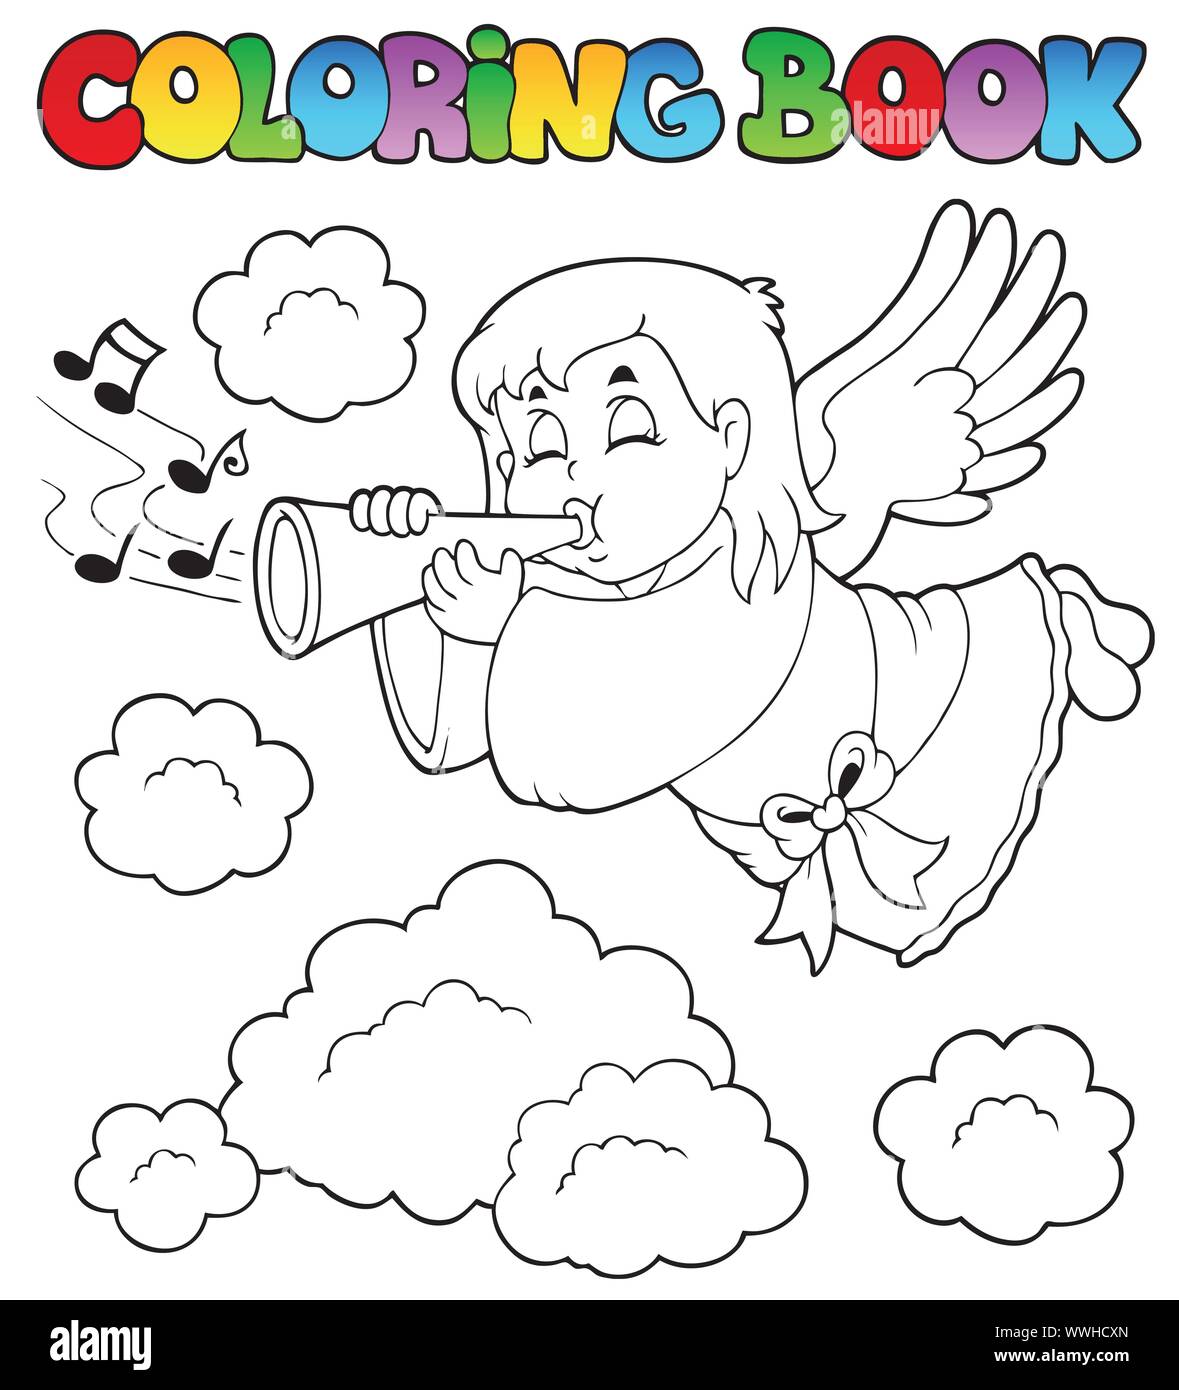 Coloring book angel theme image 3 Stock Vector